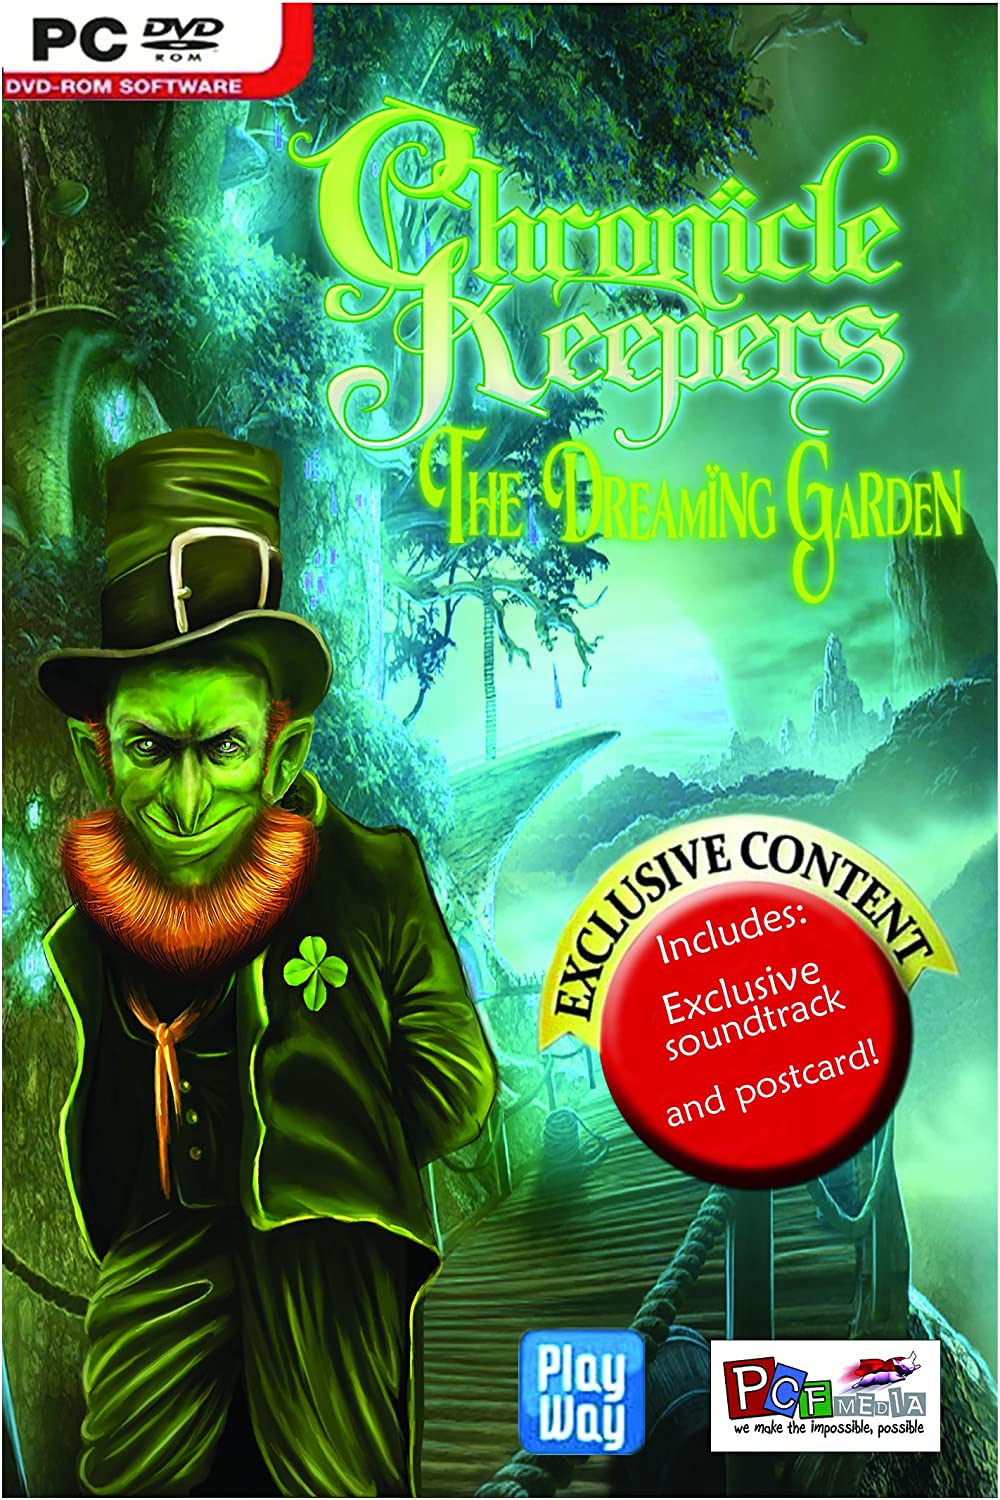 Chronicle Keepers: The Dreaming Garden Collectors Edition (PC DVD)